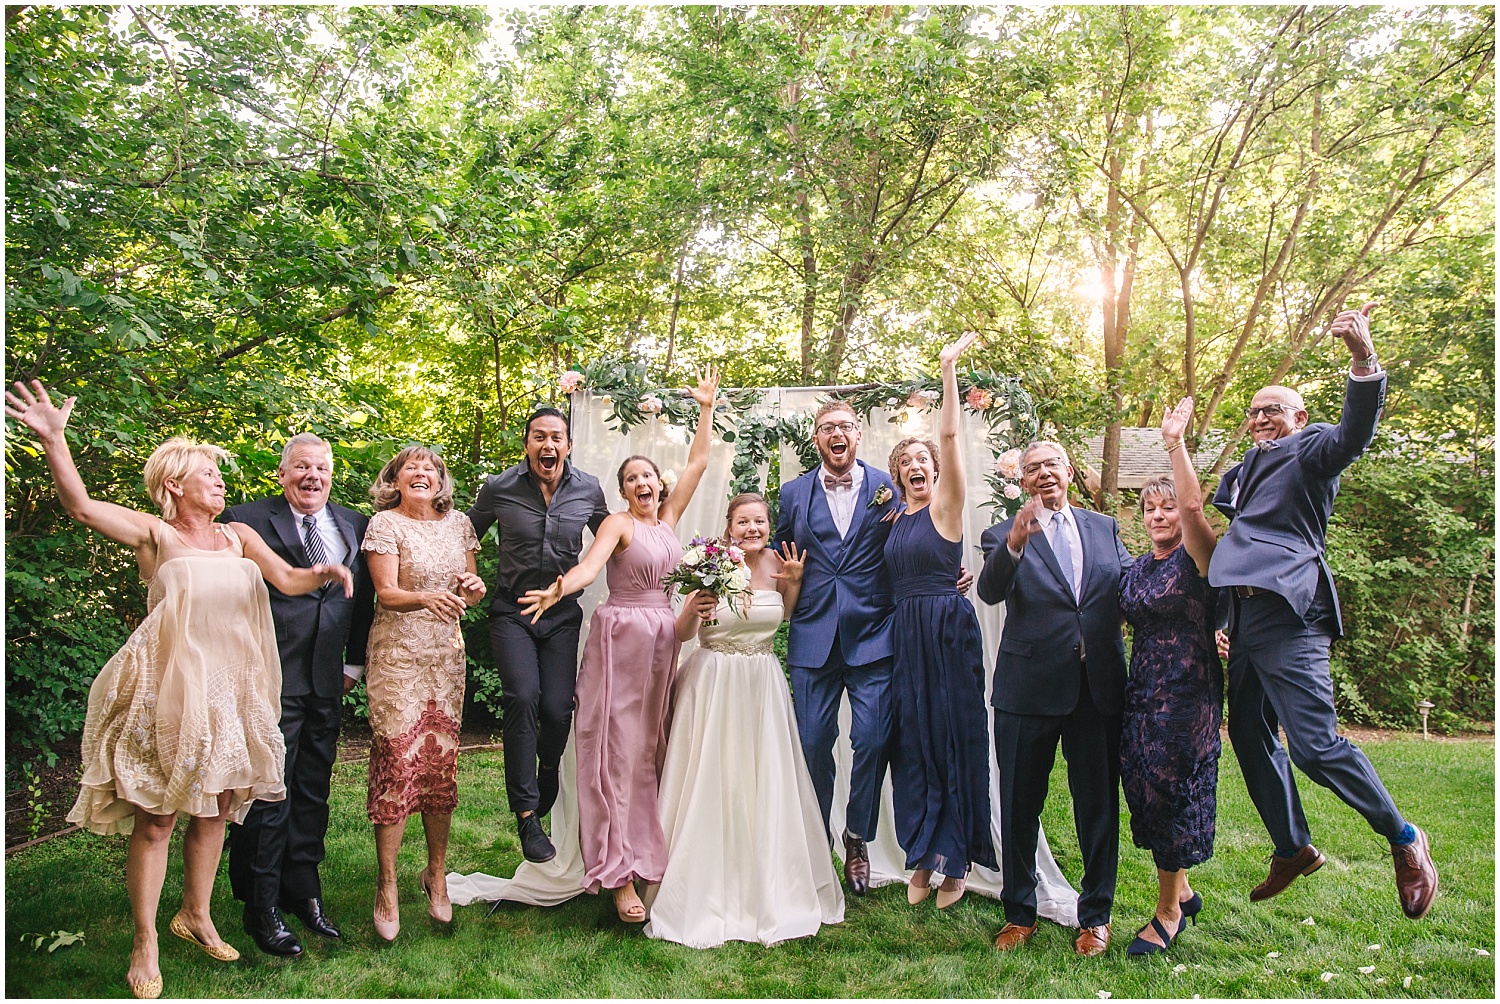 Family cheers for bride and groom who married in backyard in light of coronavirus